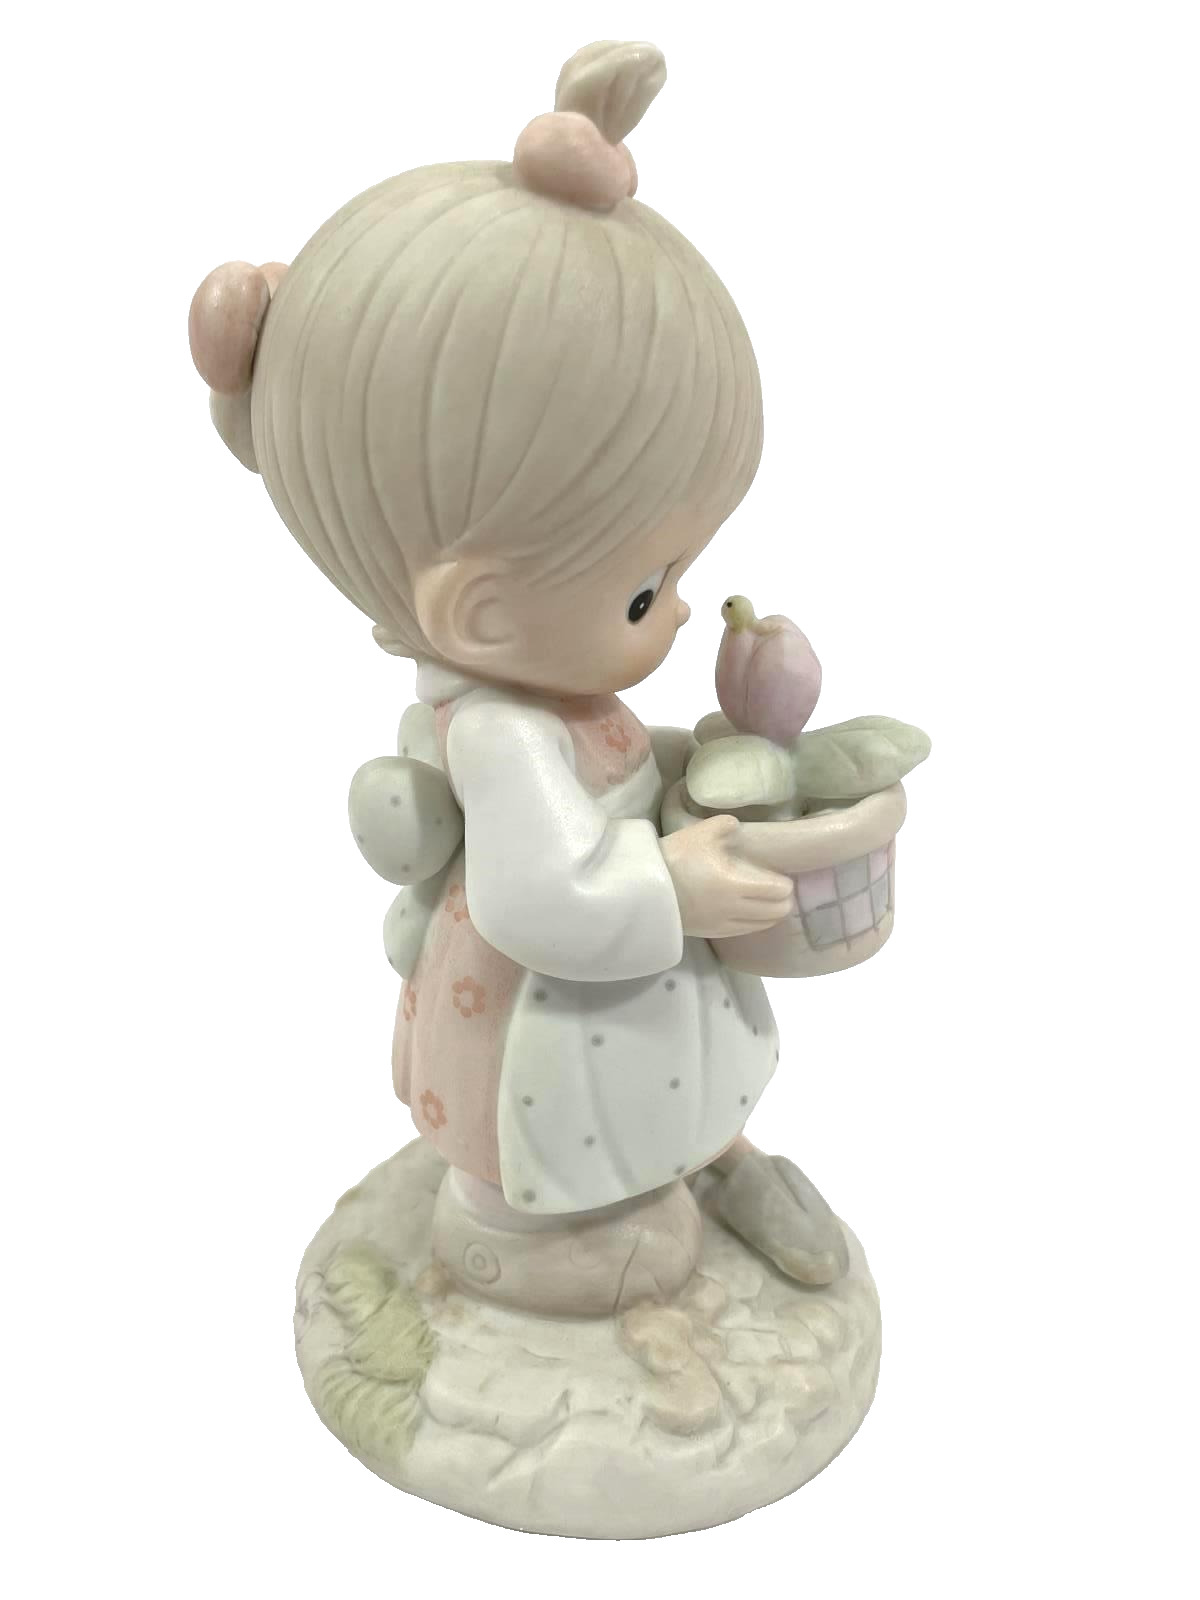 1987 Precious Moments Figurine May 110035 By Enesco